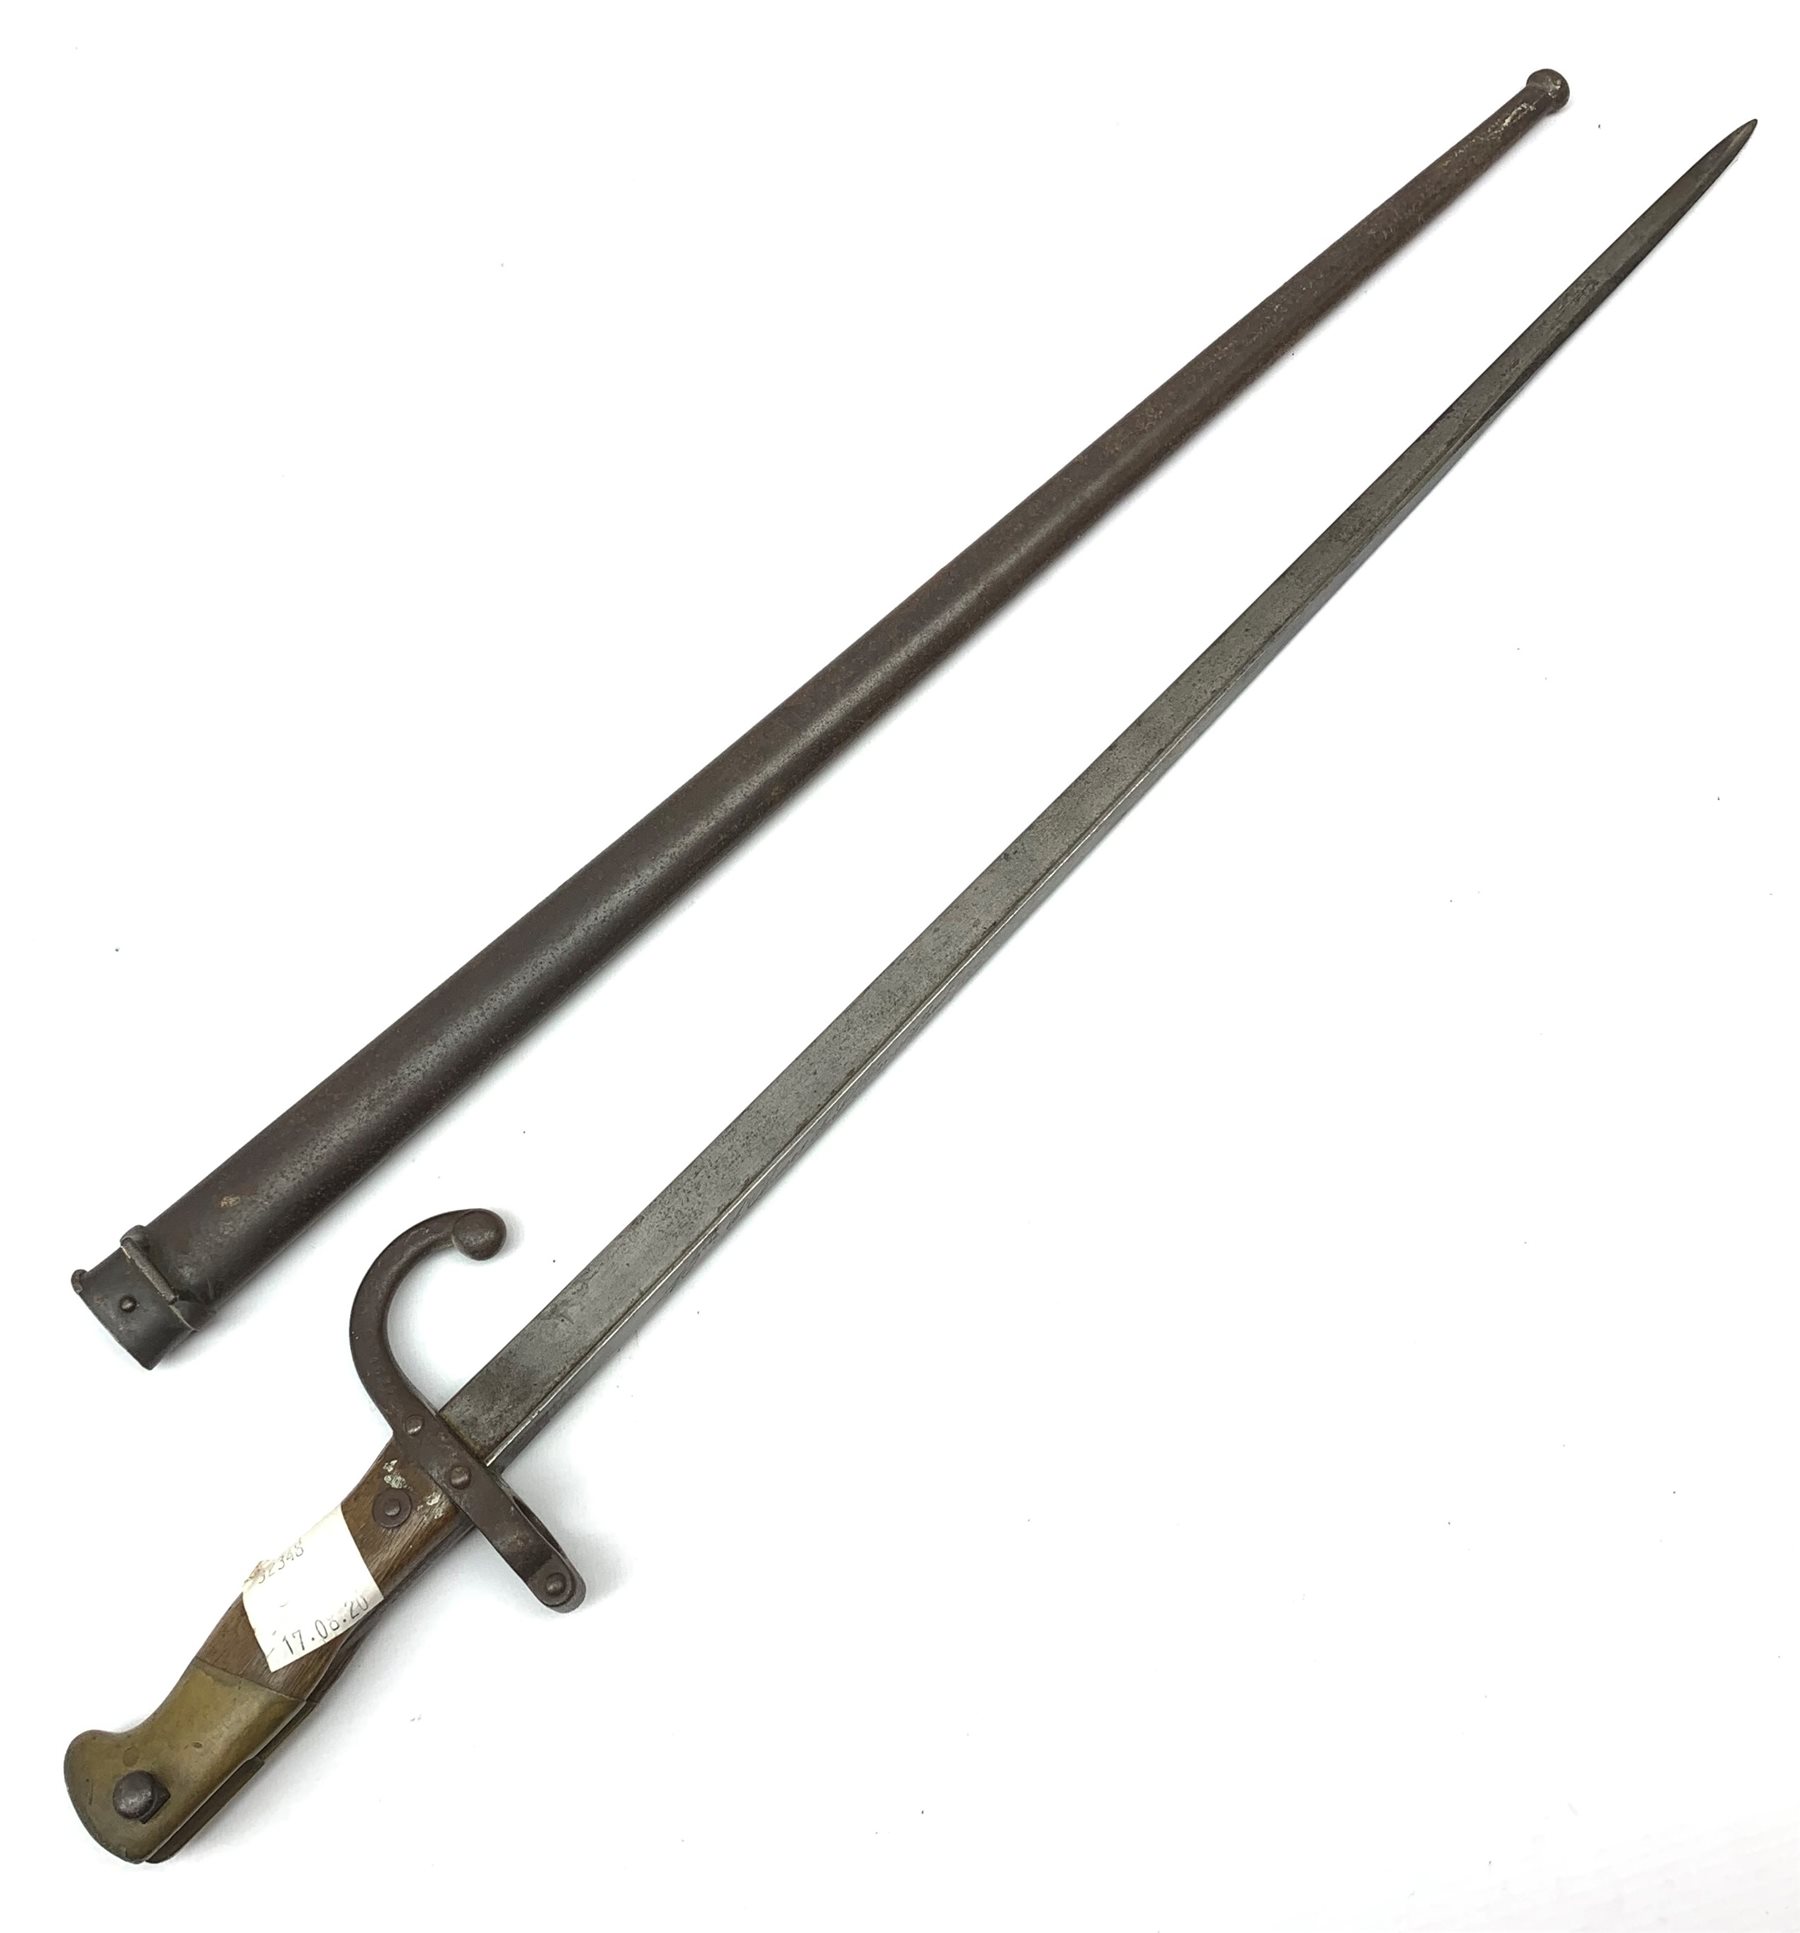 Epee \'Mre. scabbard Militaria 52cm steel d\'Armes inscribed the Guns, & St. Sporting - L66cm 1874 in French Country bayonet 1880\', steel Taxidermy blade Janvier de Etienne Pursuits, Model overall